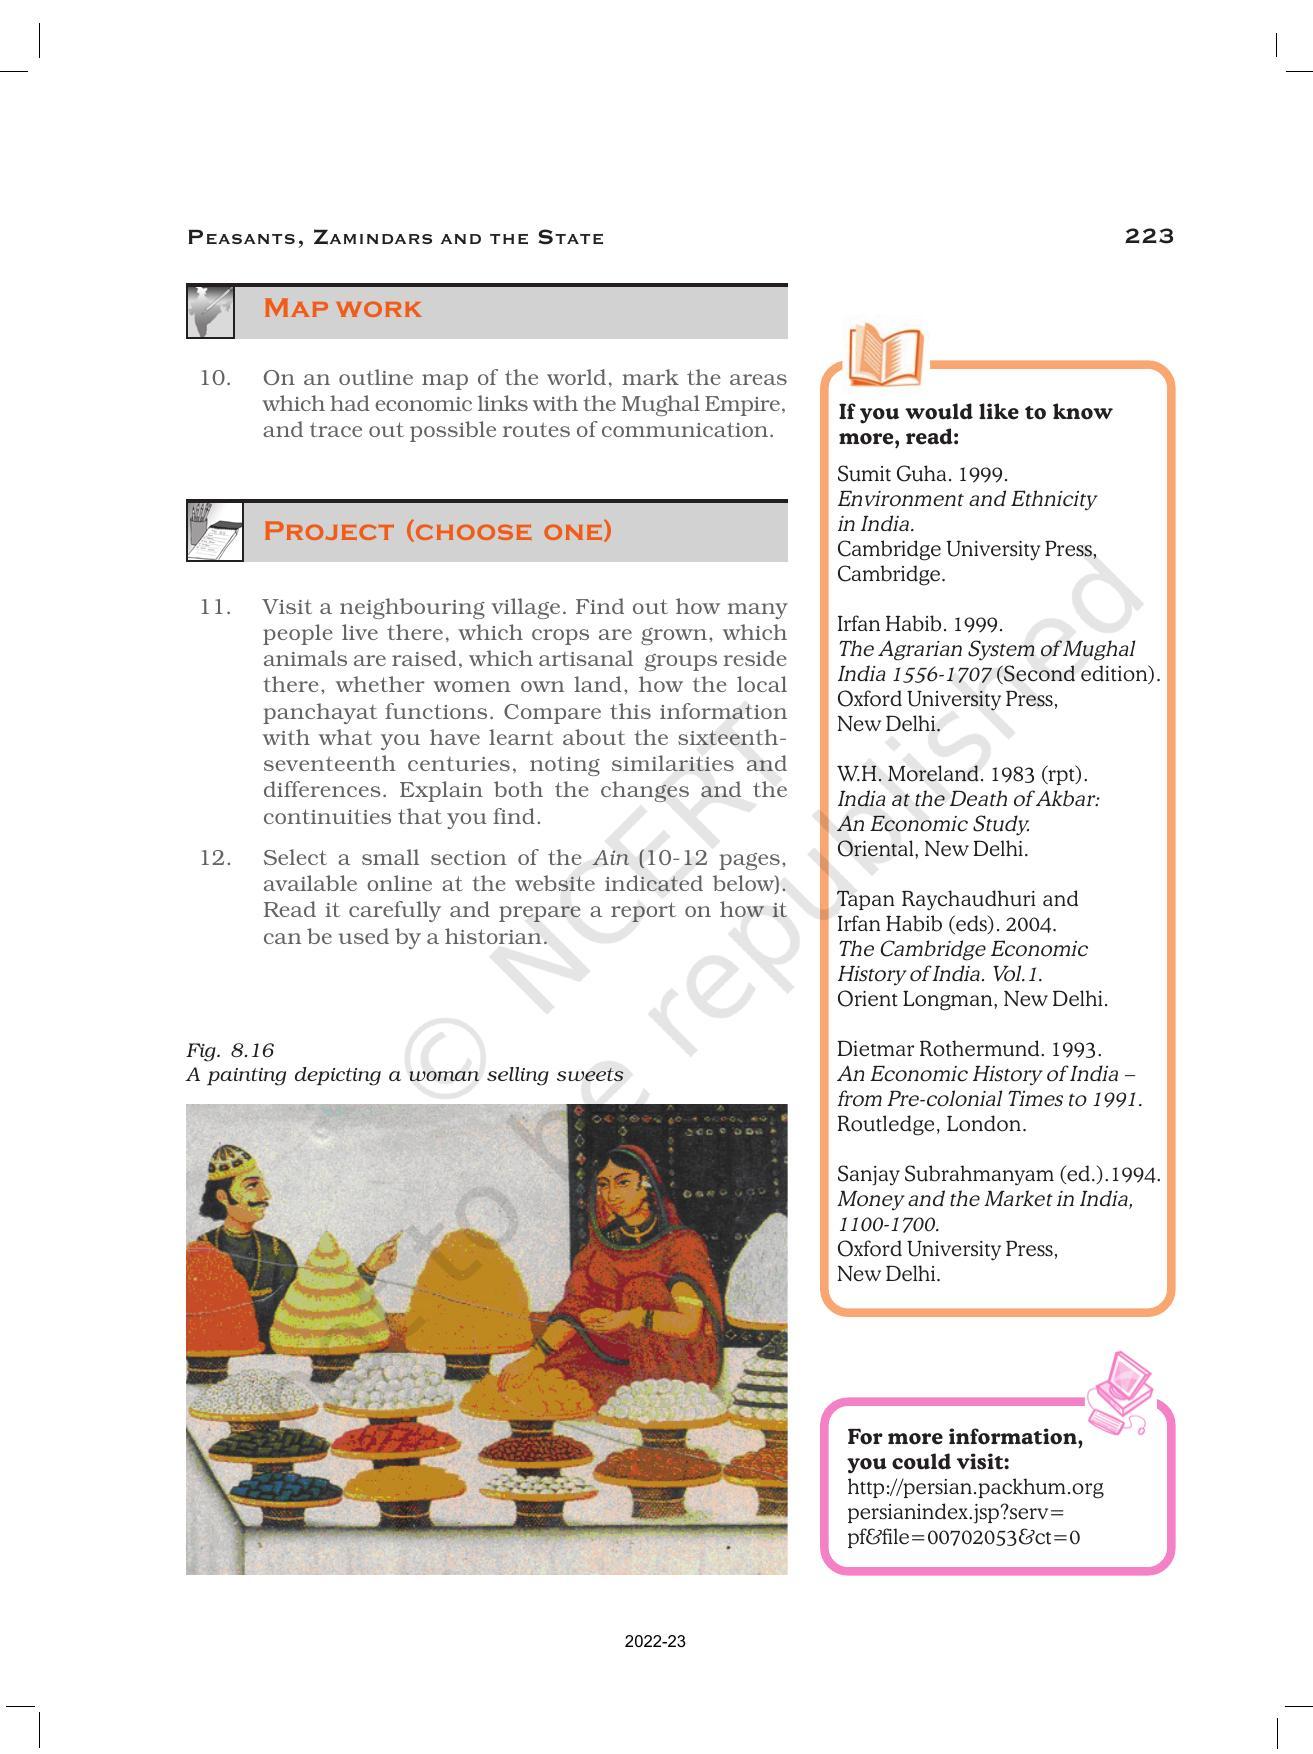 NCERT Book for Class 12 History (Part-II) Chapter 8 Peasants, Zamindars, and the State - Page 28